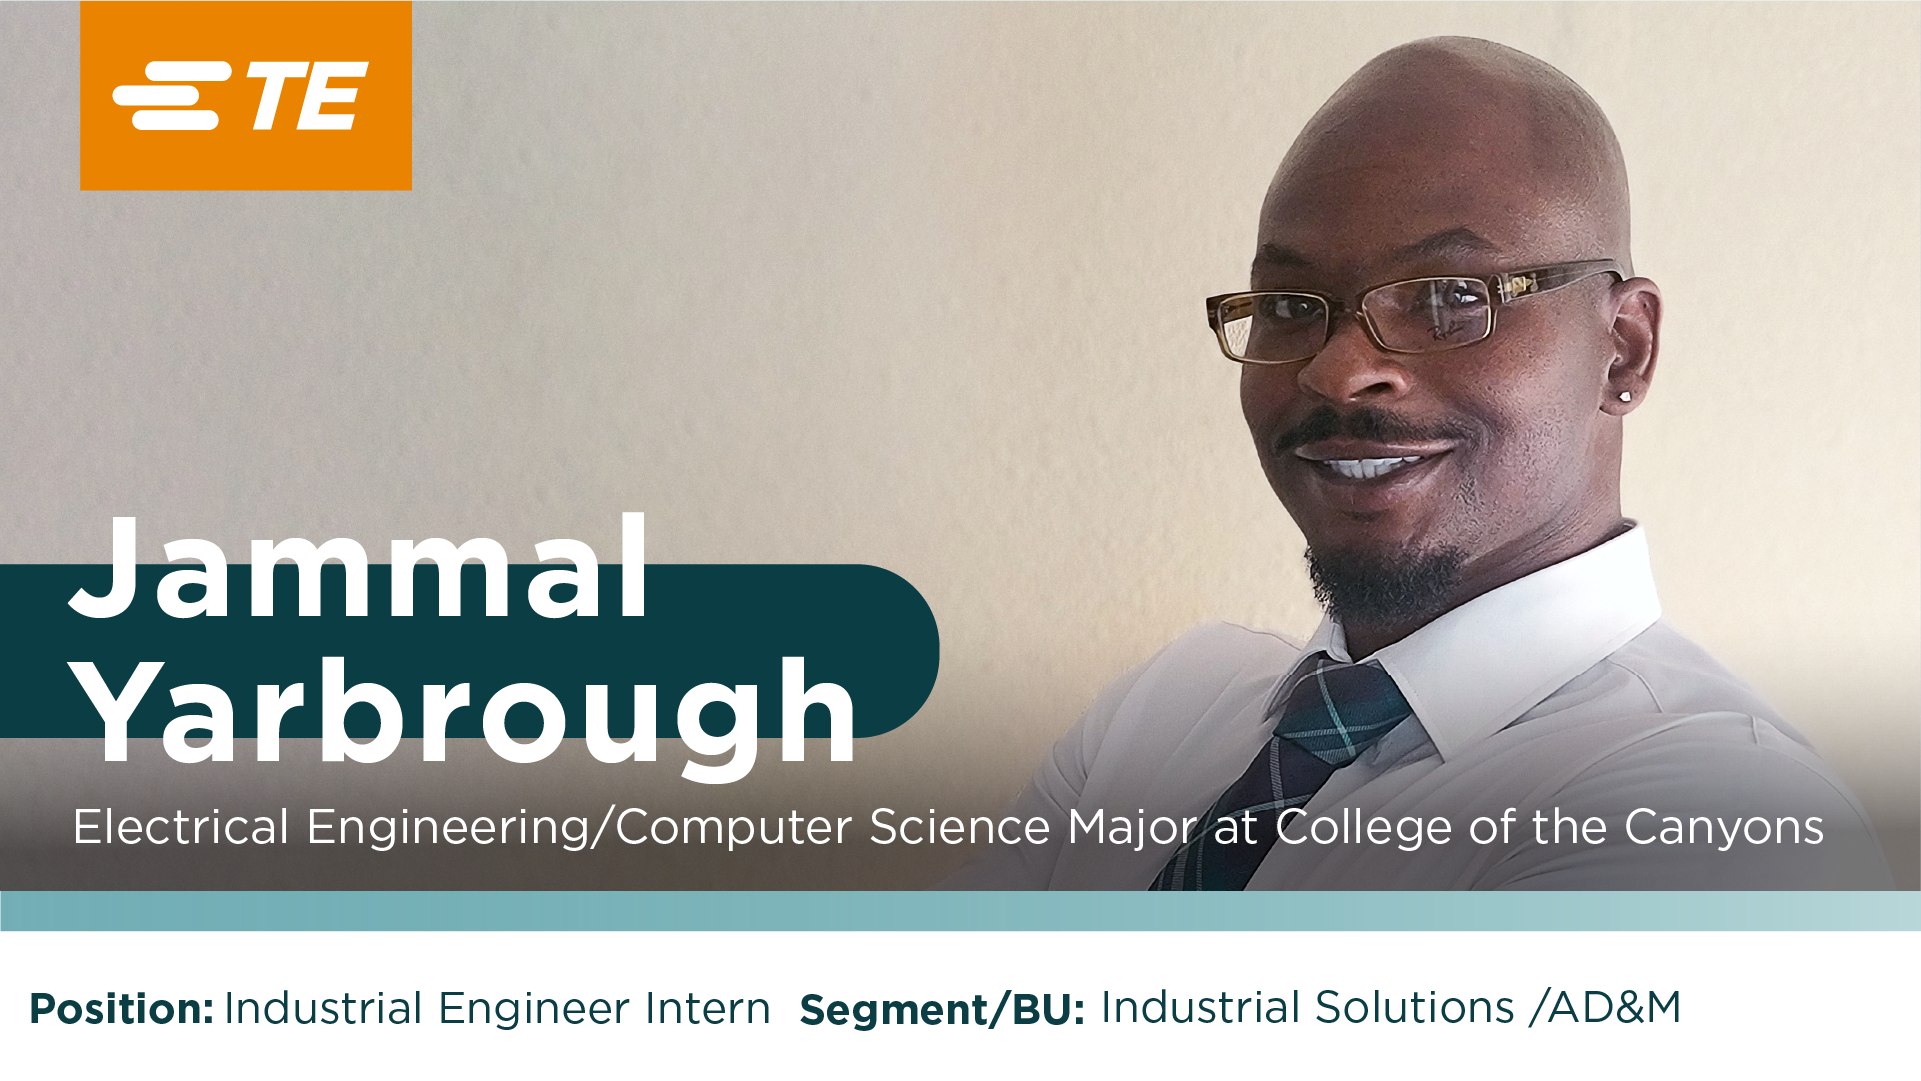 Jammal Yarbrough, Electrical Engineering/Computer Science Major at College of the Canyons